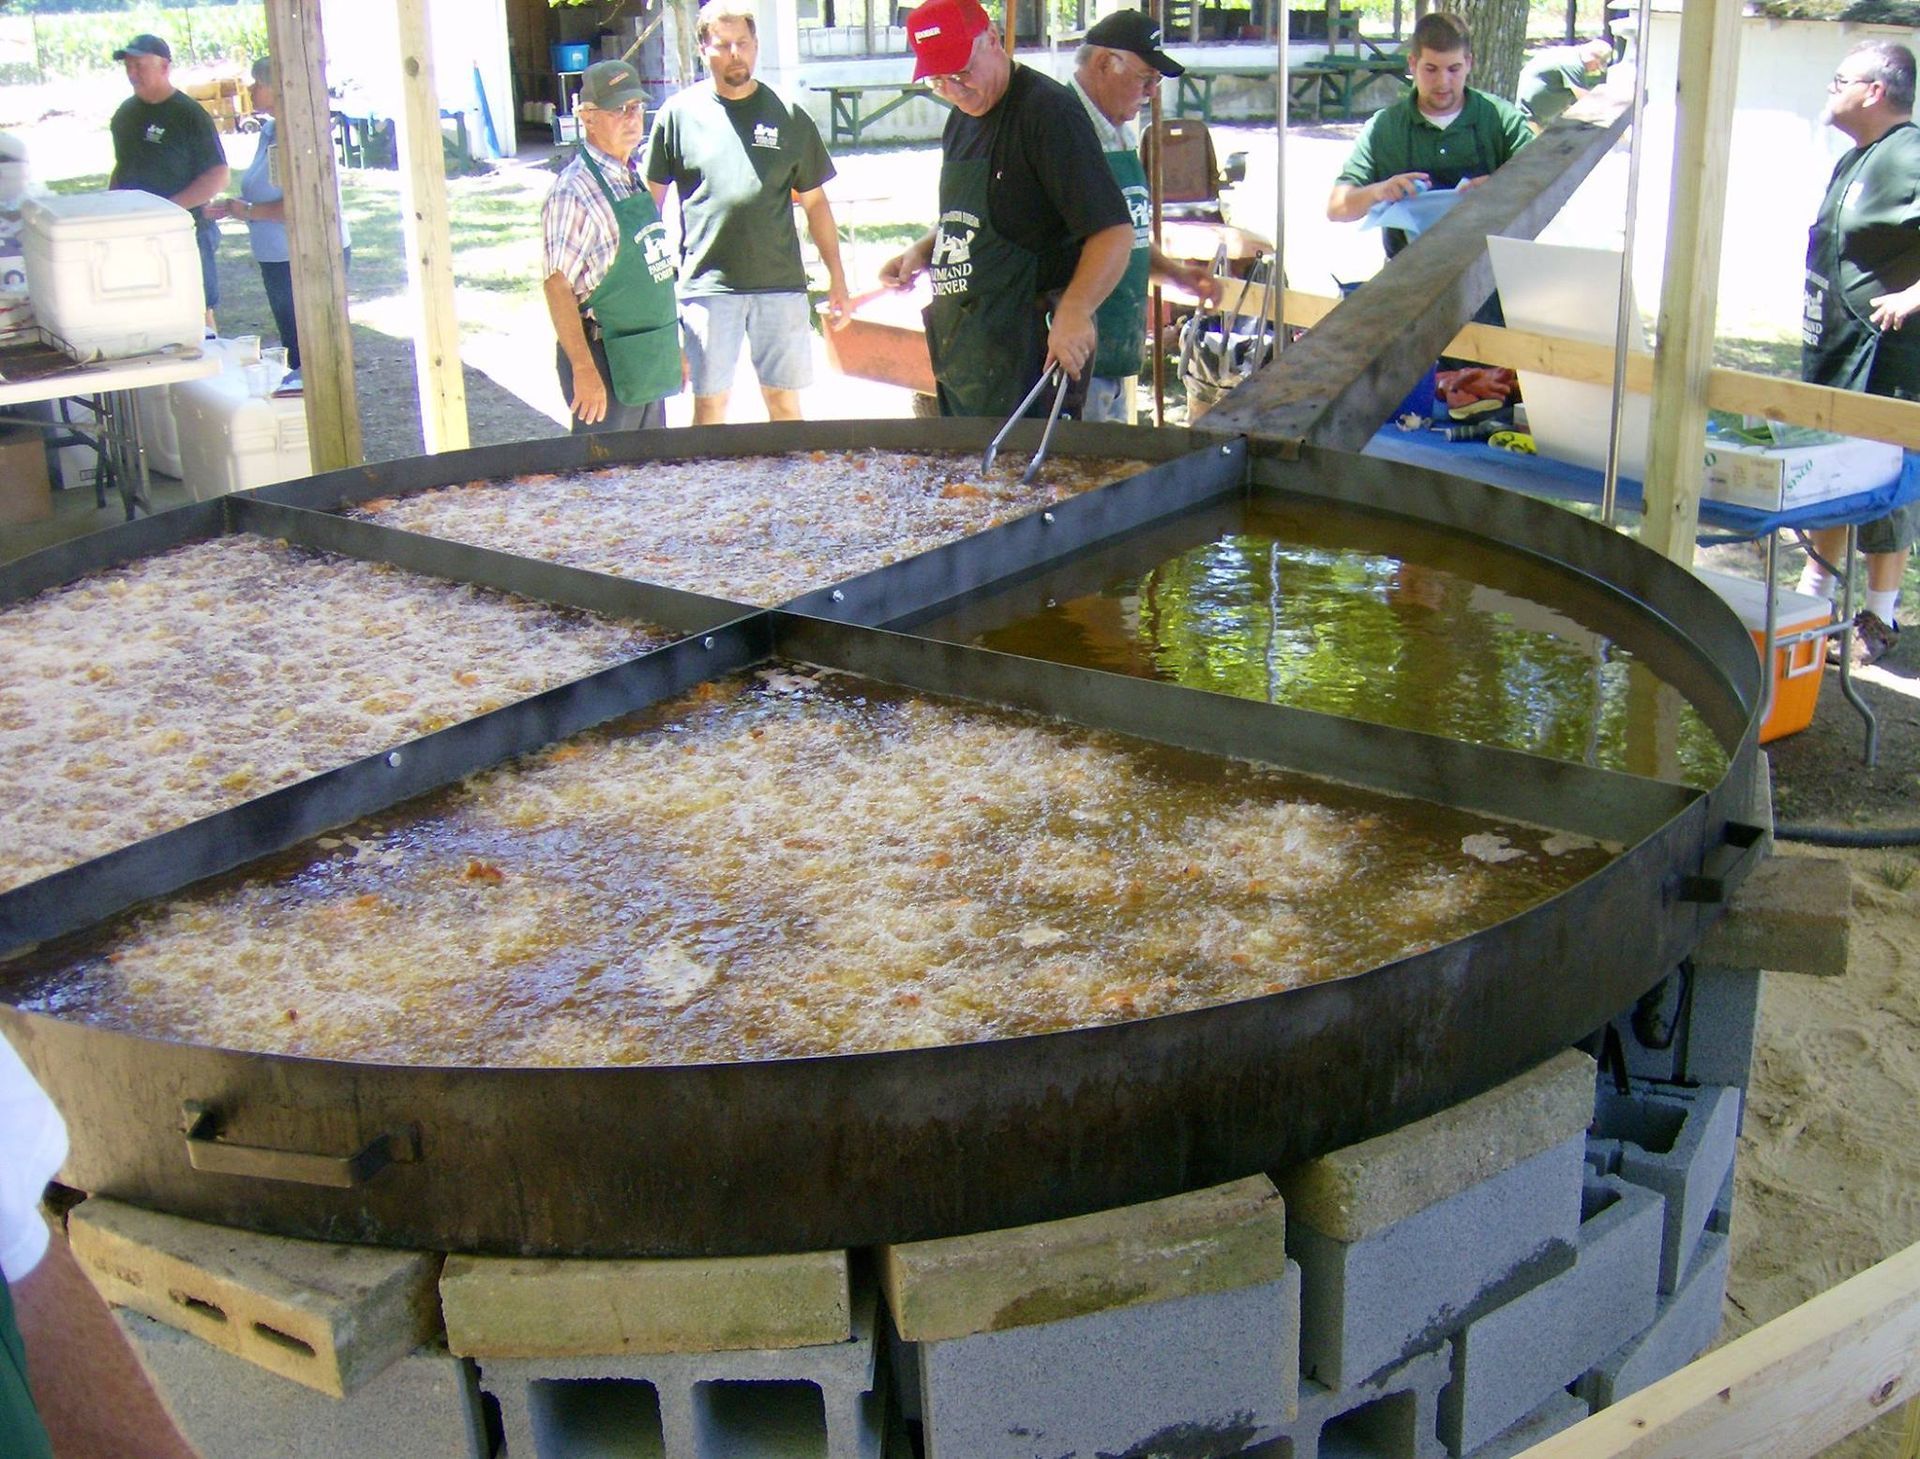 World's Largest Frying Pan, world record in Georgetown, Delaware